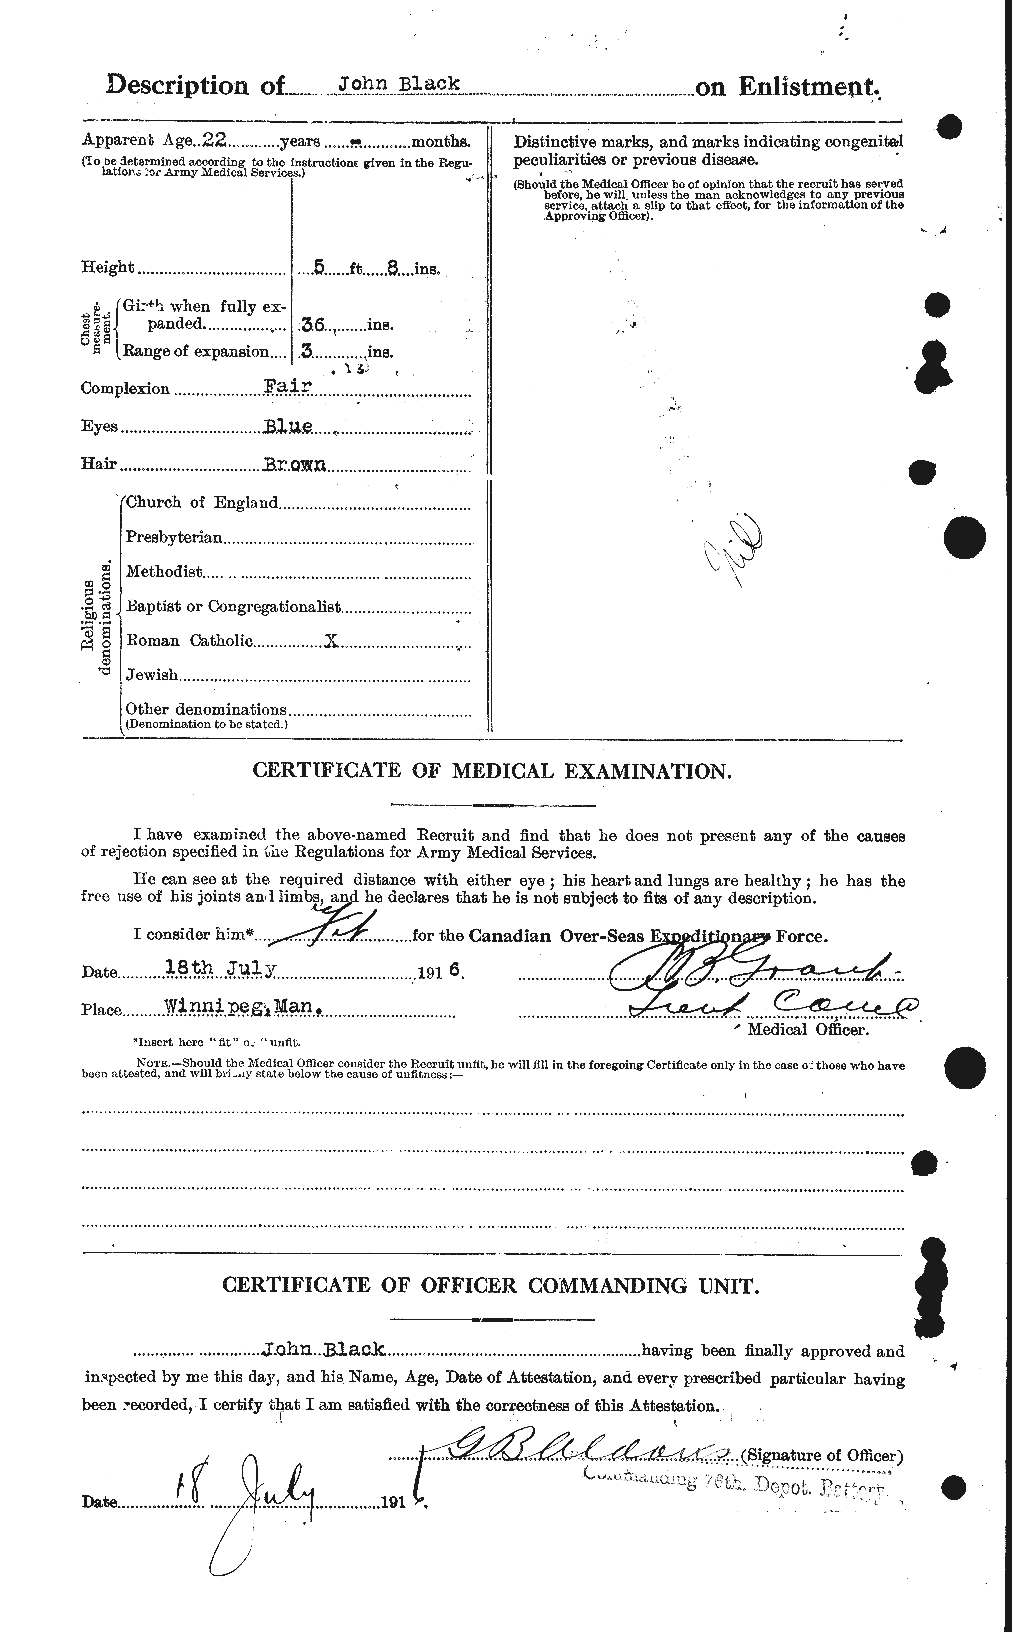 Personnel Records of the First World War - CEF 246899b